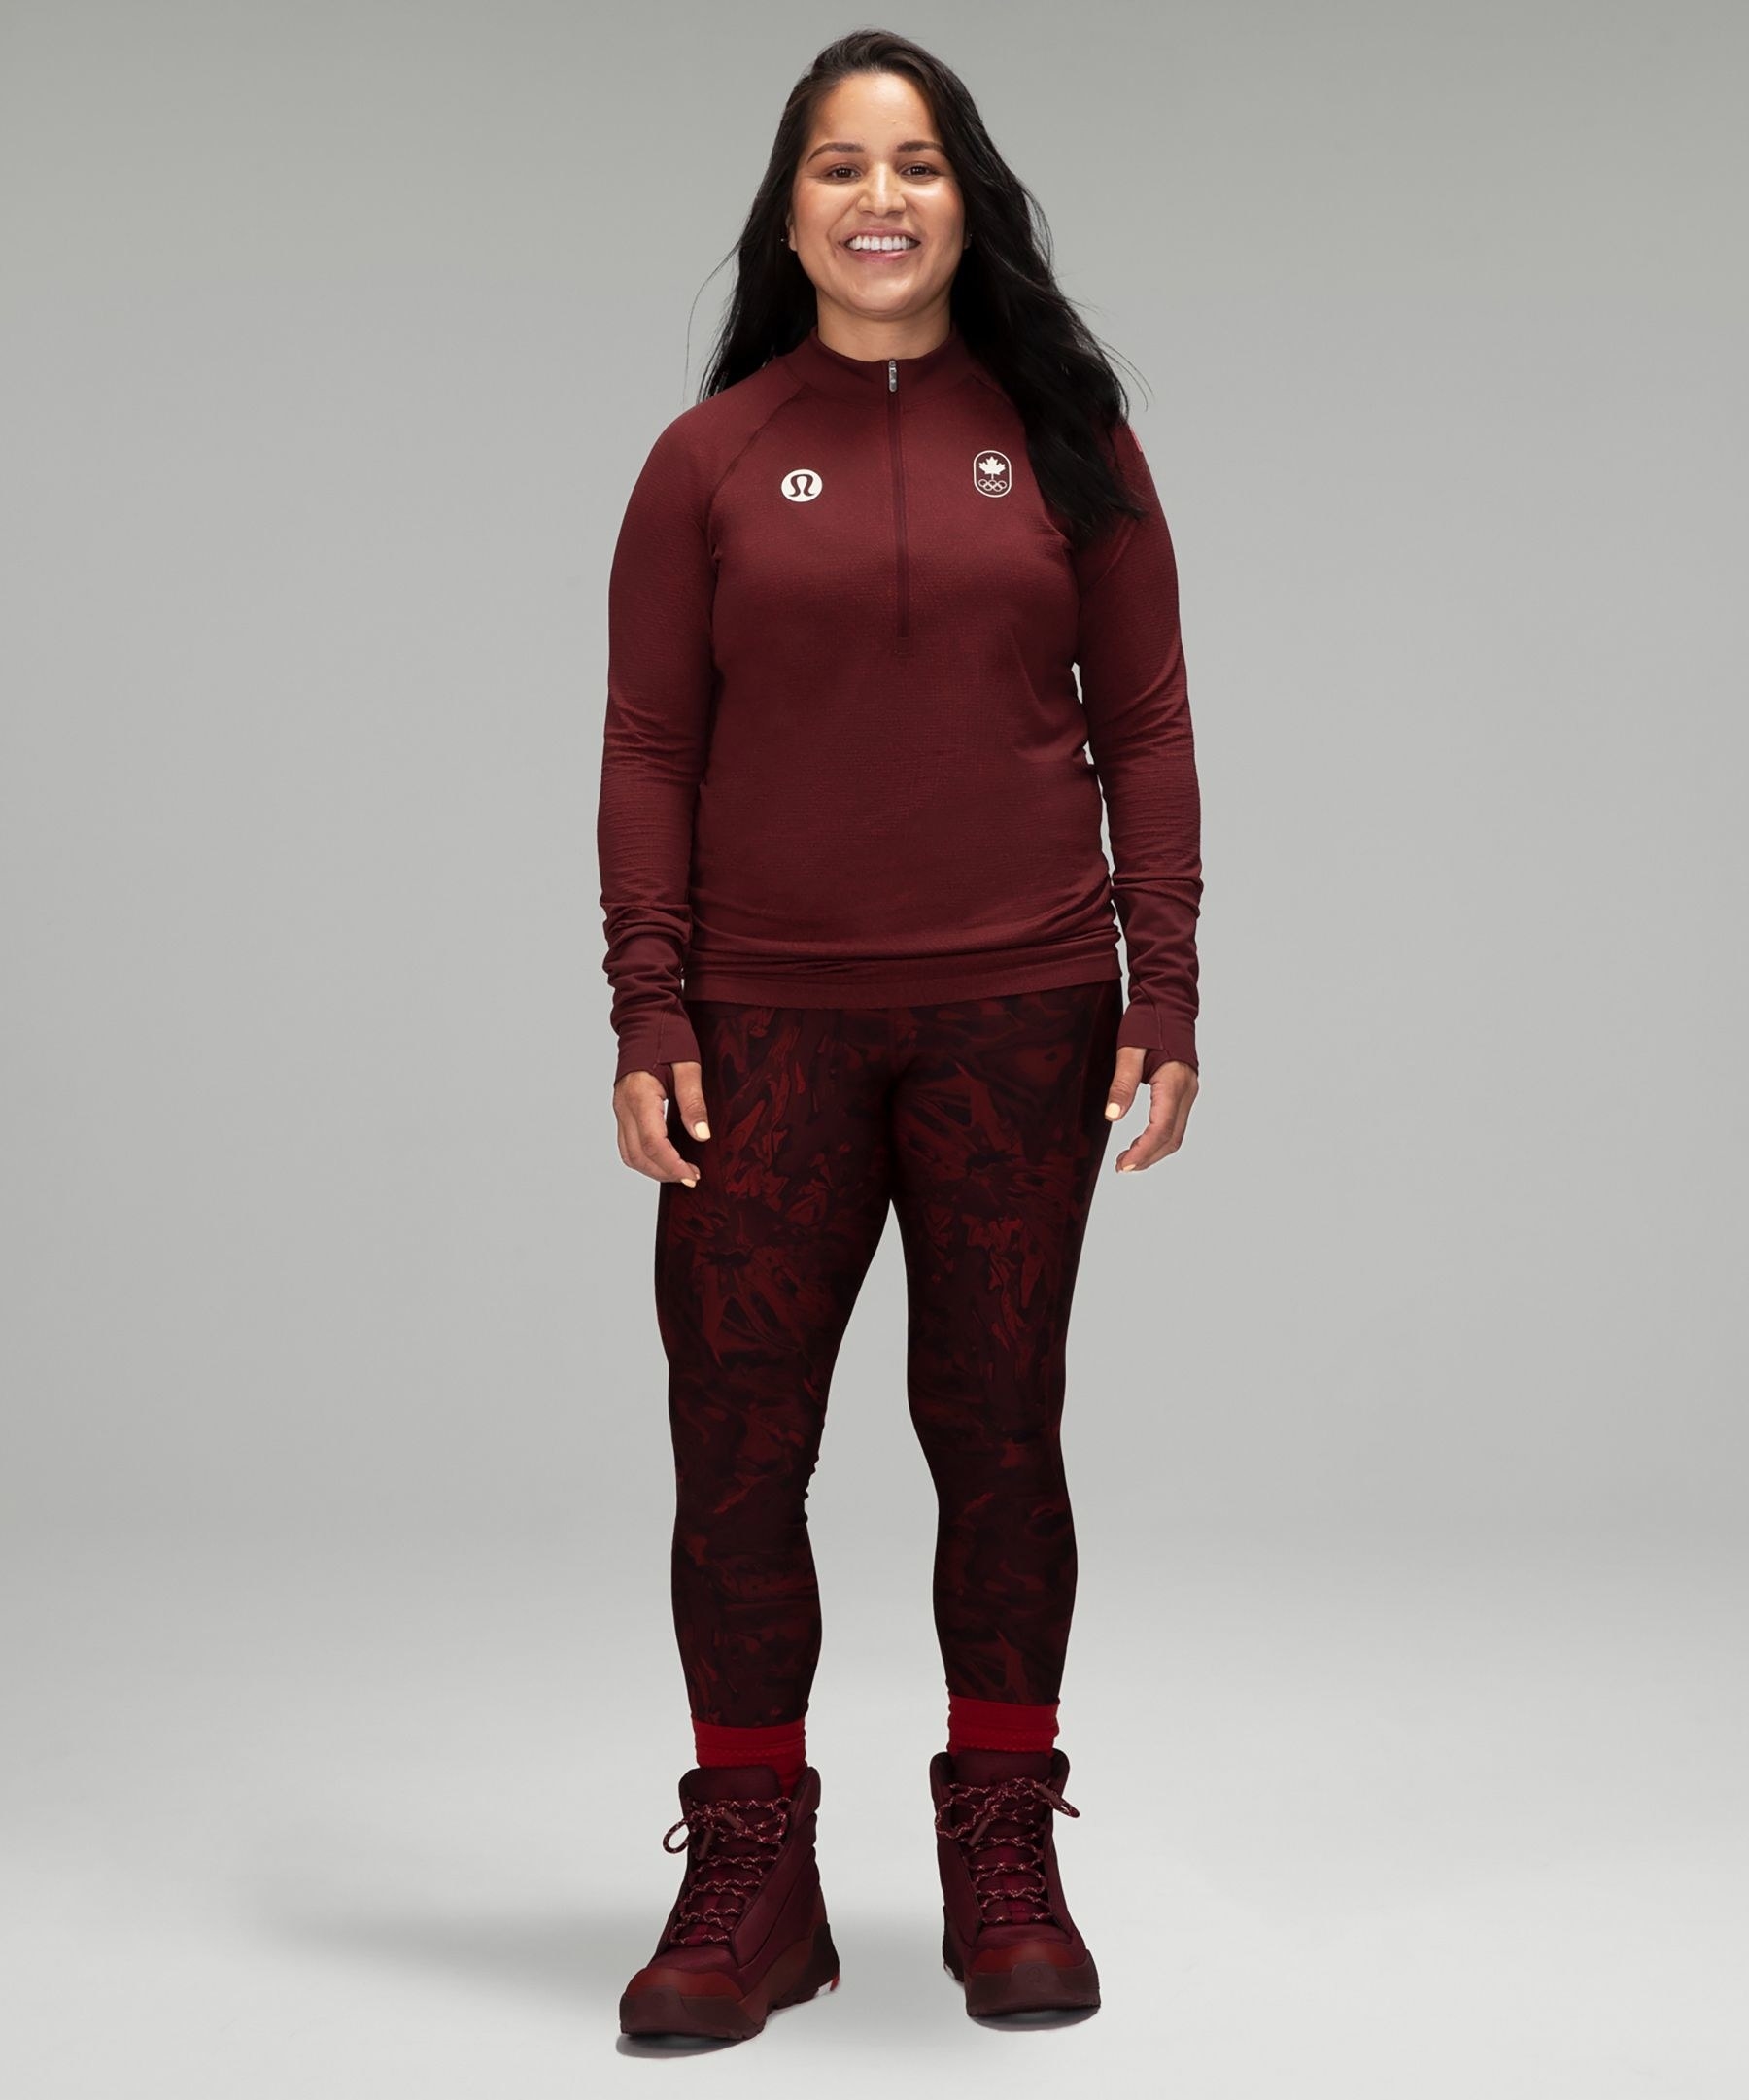 a smiling person wearing the thermal leggings